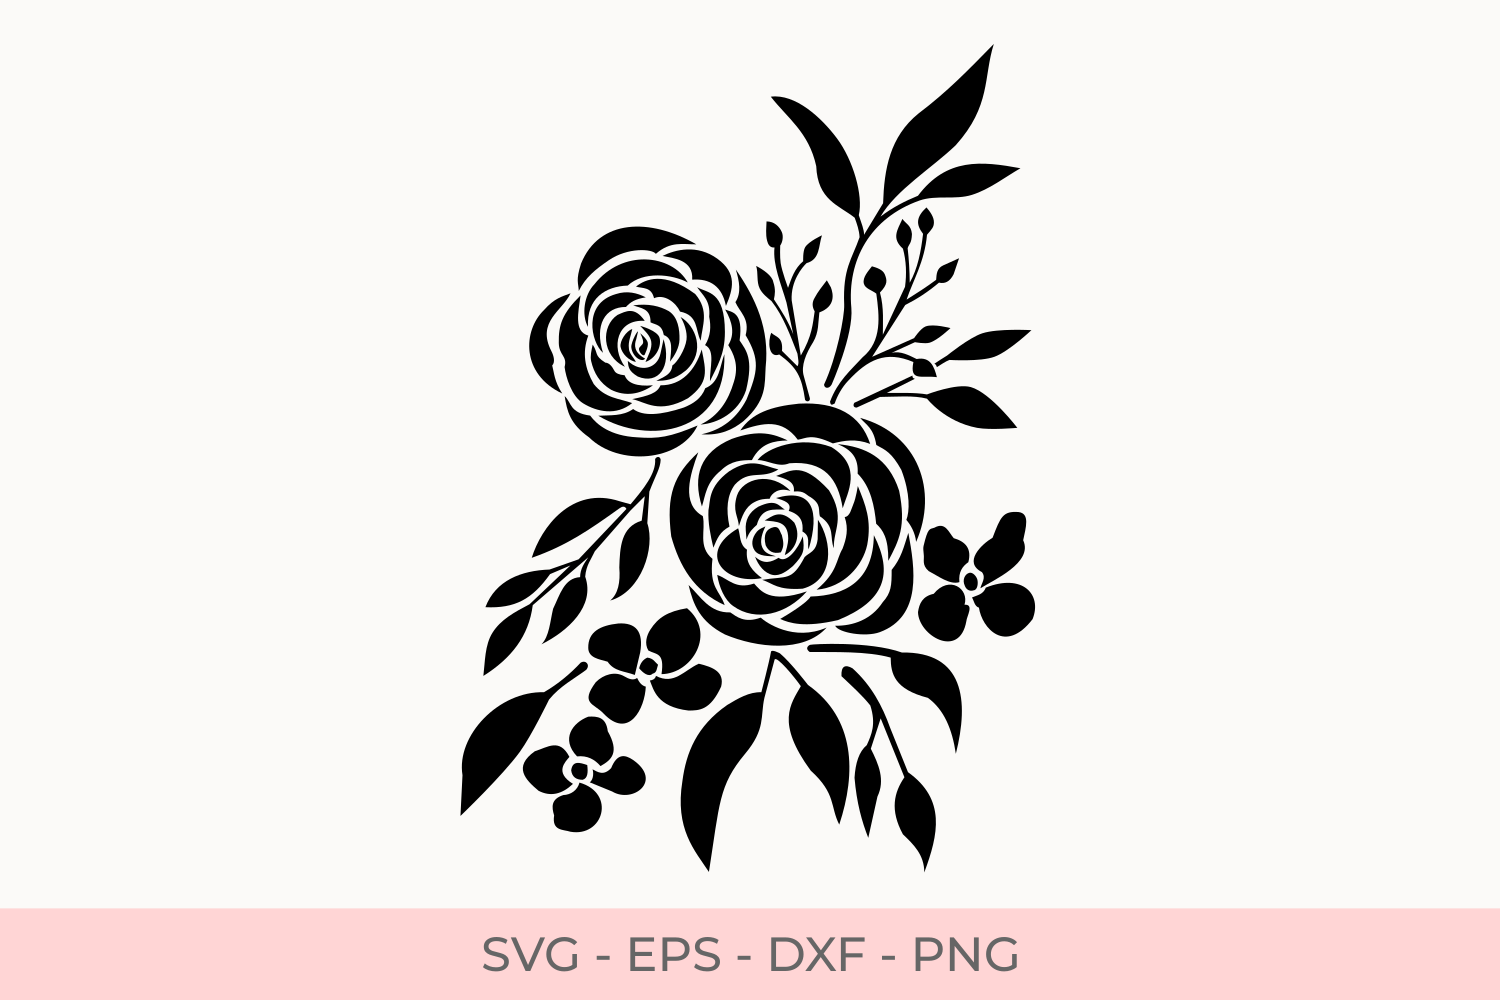 Download Rose Flowers Silhouette Svg, Rose Florals Silhouette Svg, Flower Bouquets Svg